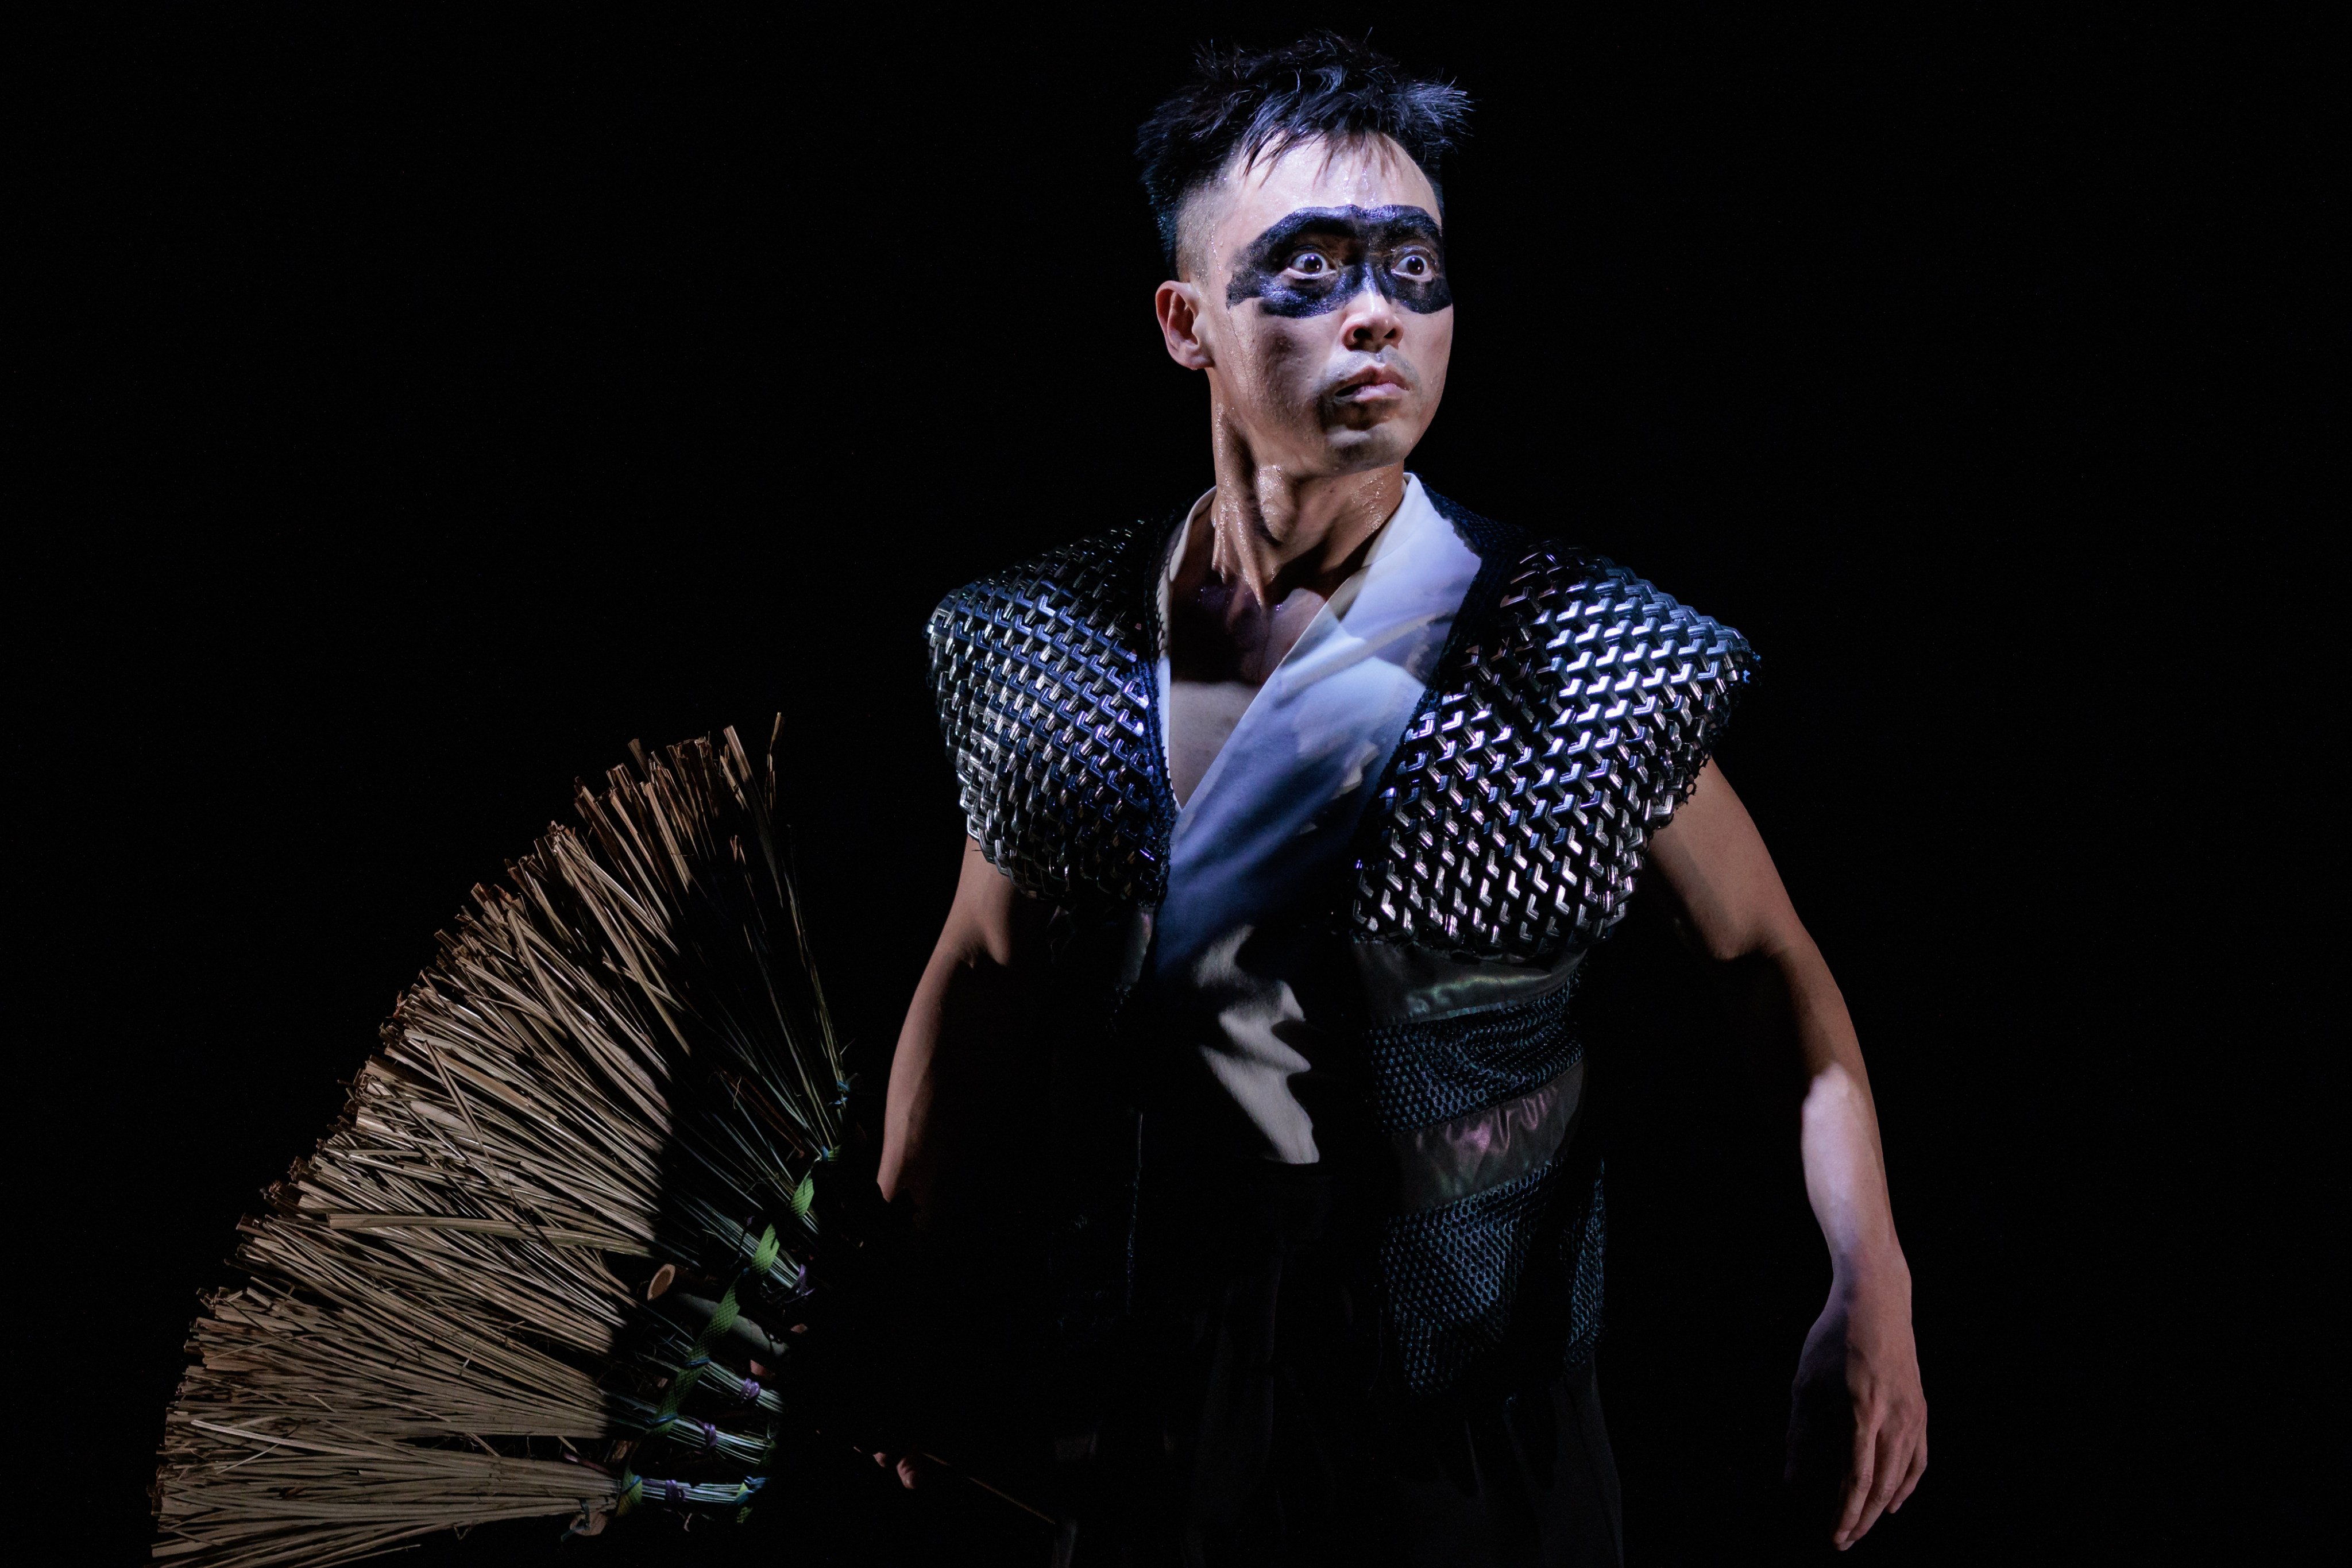 Dancer Cyrus Hui during the segment “Run to ... the brick red street” in Siu Lung Fung Dance Theater’s “Run”, an experimental new production inspired by the tale of Lin Chong in the Chinese classic “Water Margin” and the uncertainty faced by people in present times (Photo: Eric Hong @ Moon 9 Image)
